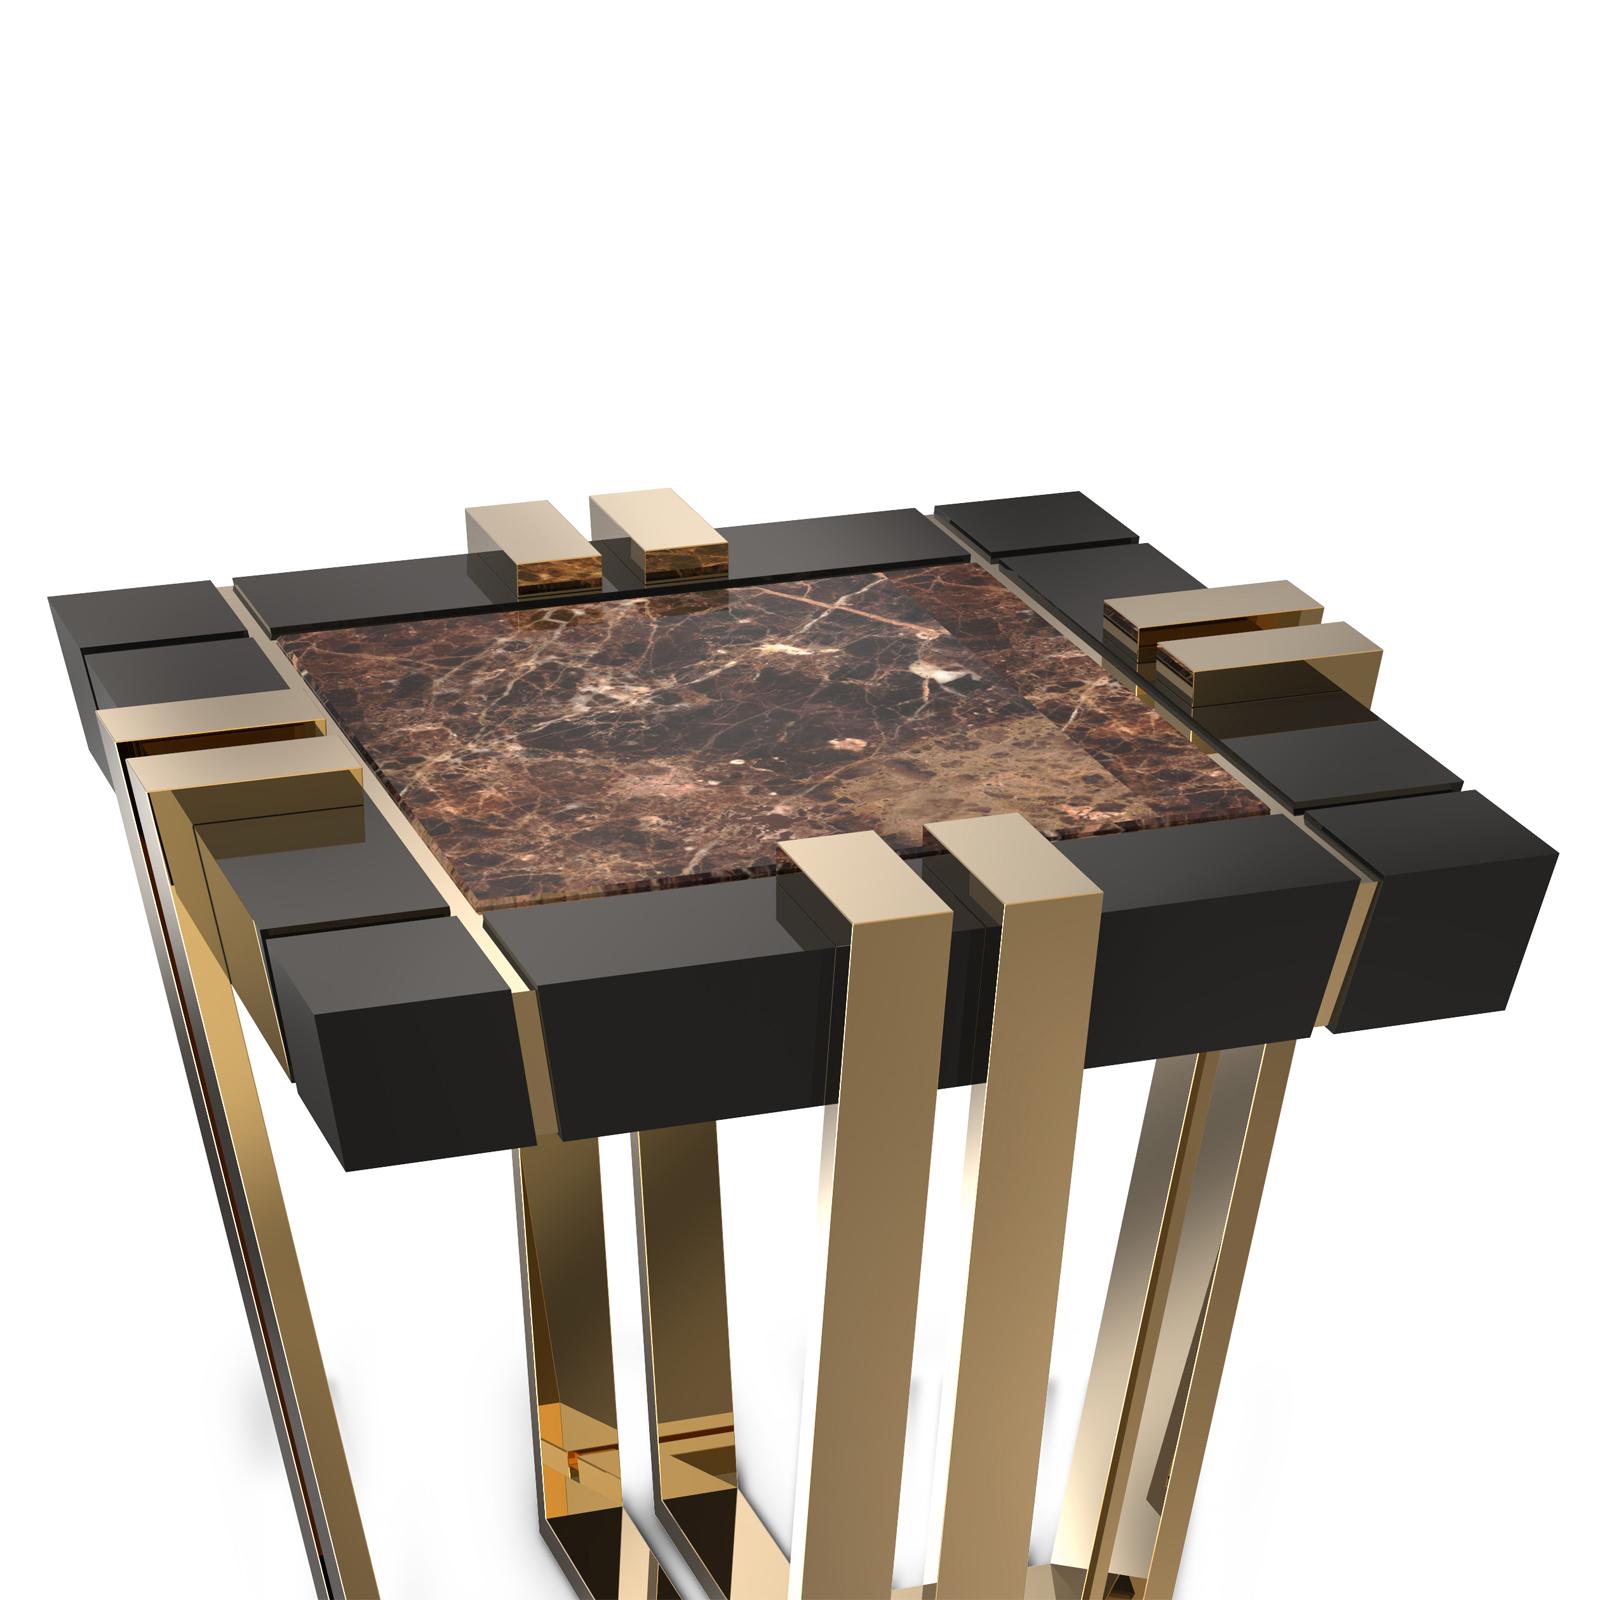 Side Table Emperador with brown marble top with
black lacquered wood frame. With polished brass
base and polished brass subtle line details.